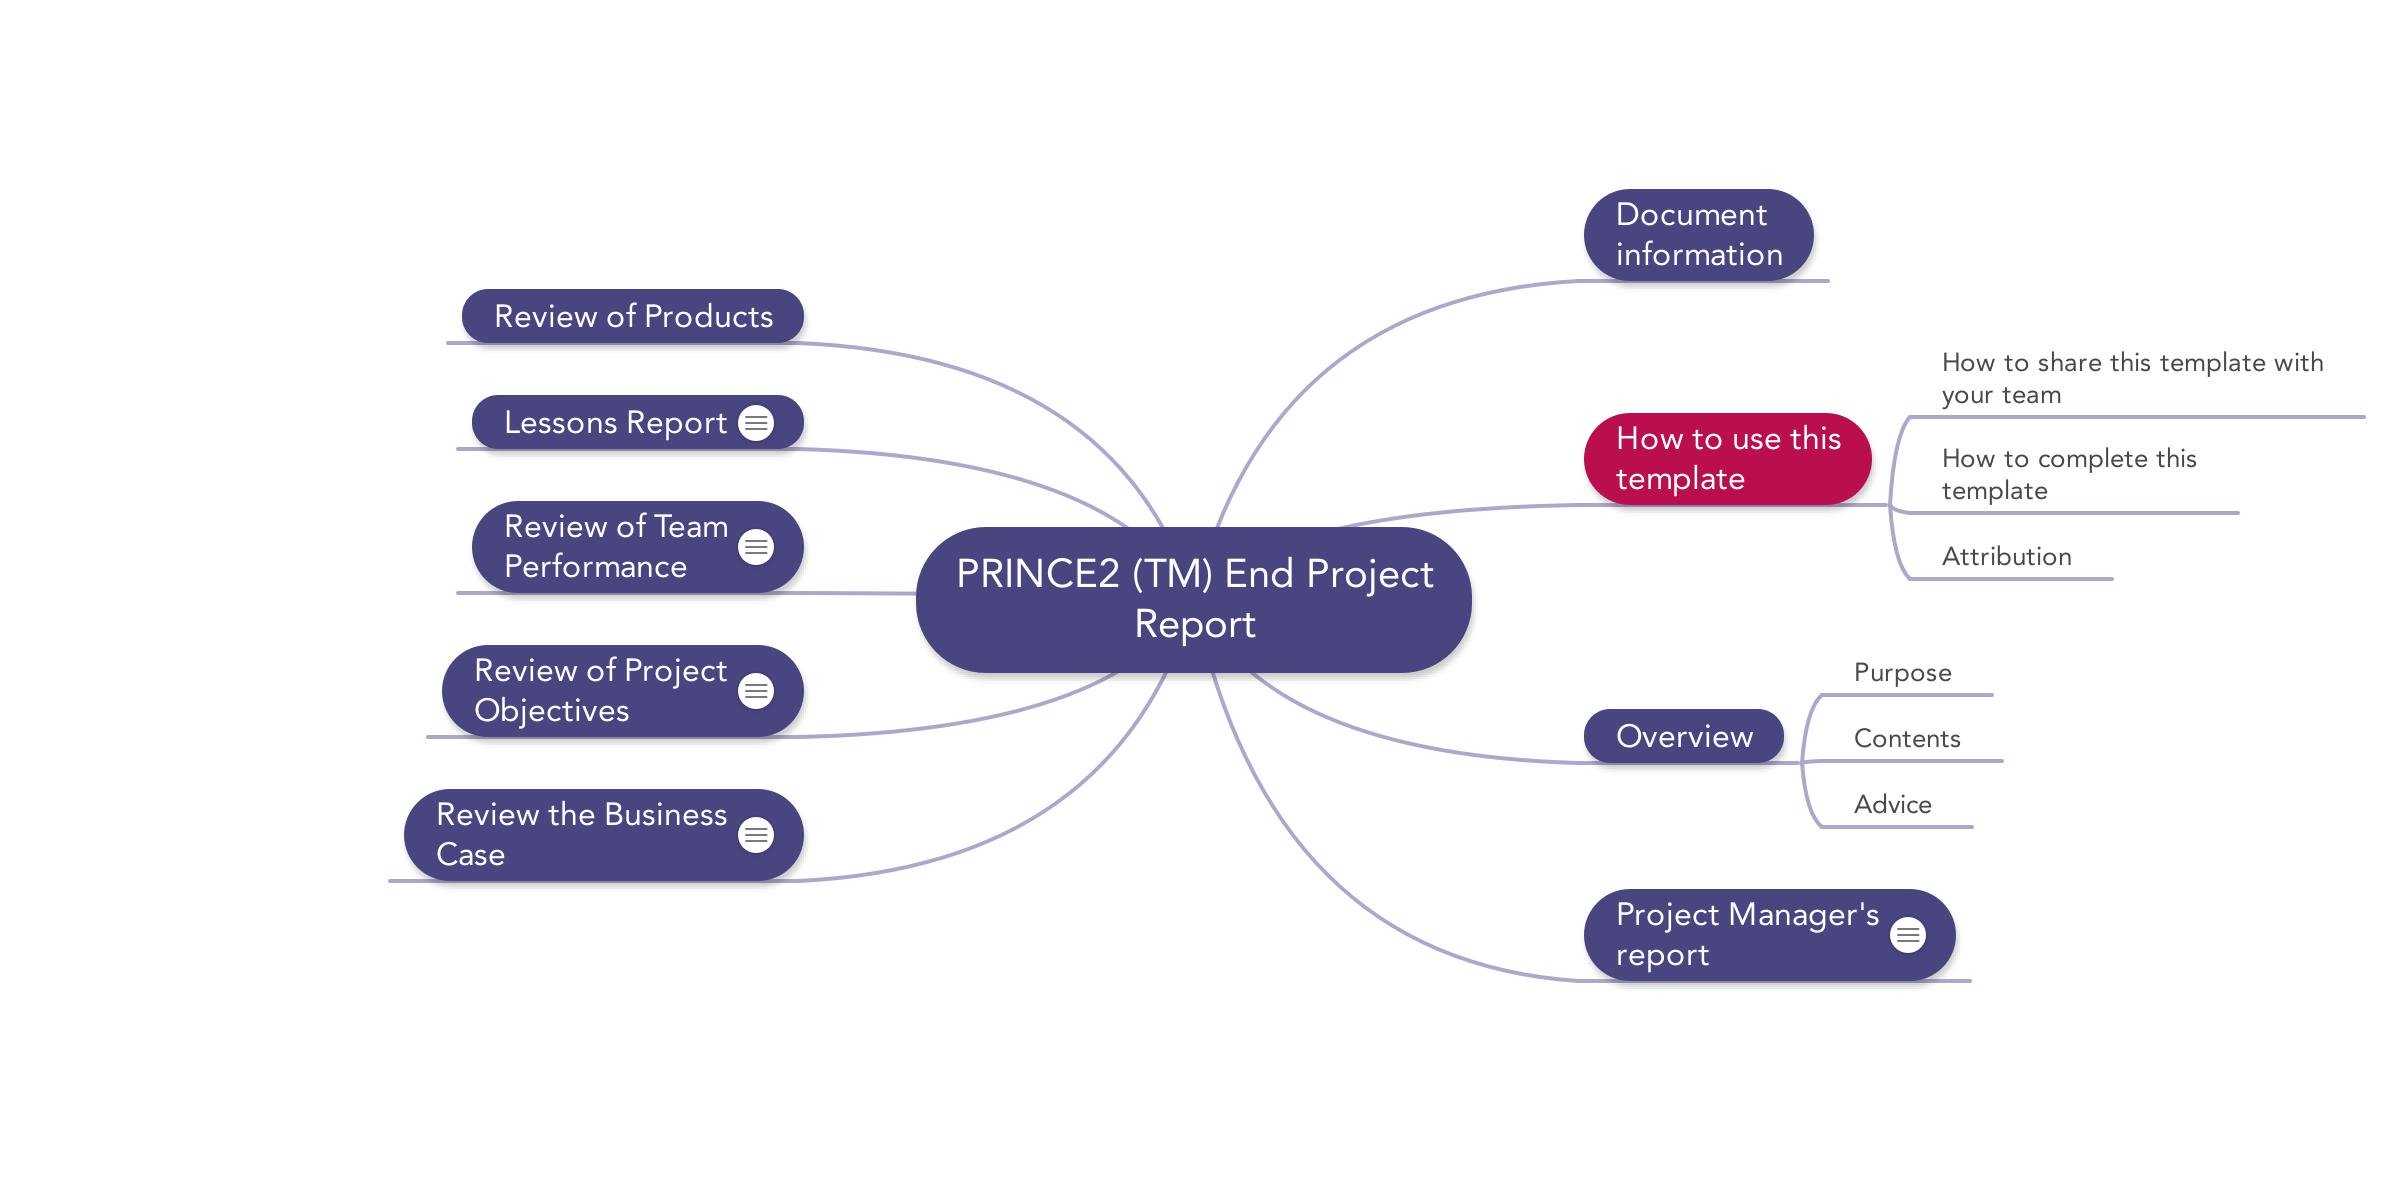 Prince2 End Project Report | Download Template With Regard To Prince2 Lessons Learned Report Template